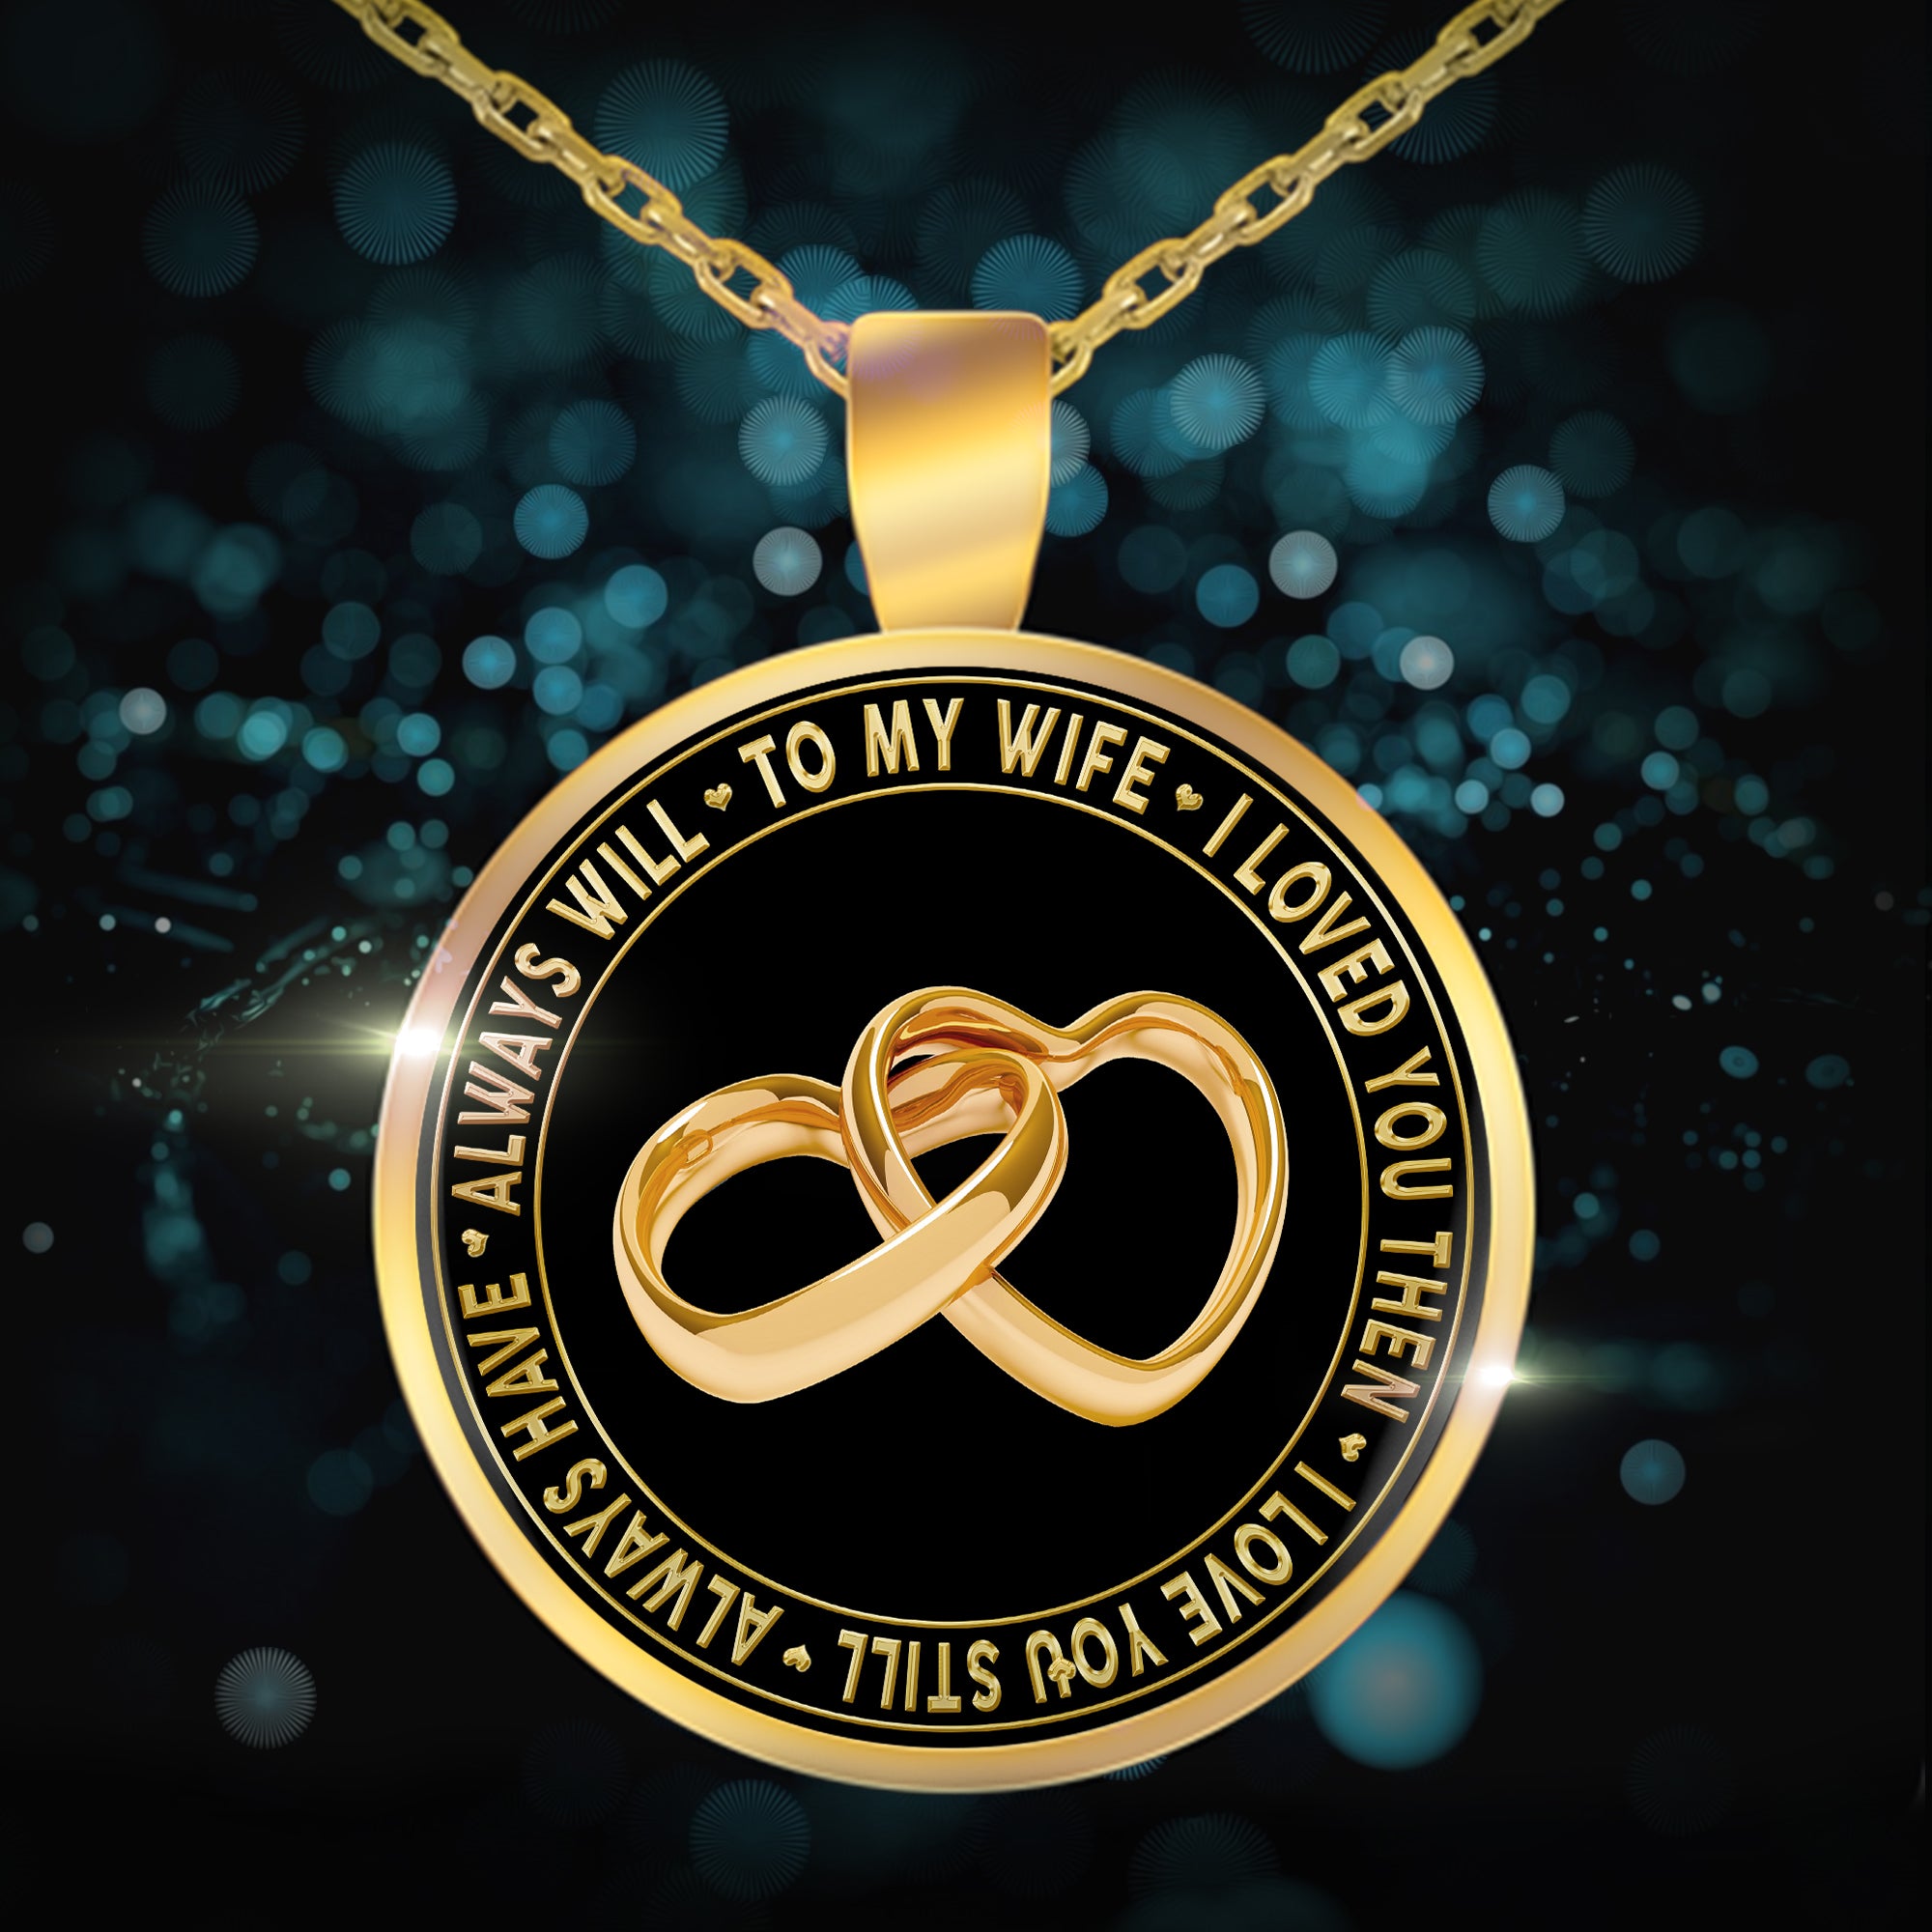 To My Wife - "I Love You Always" Gold Pendant Necklace